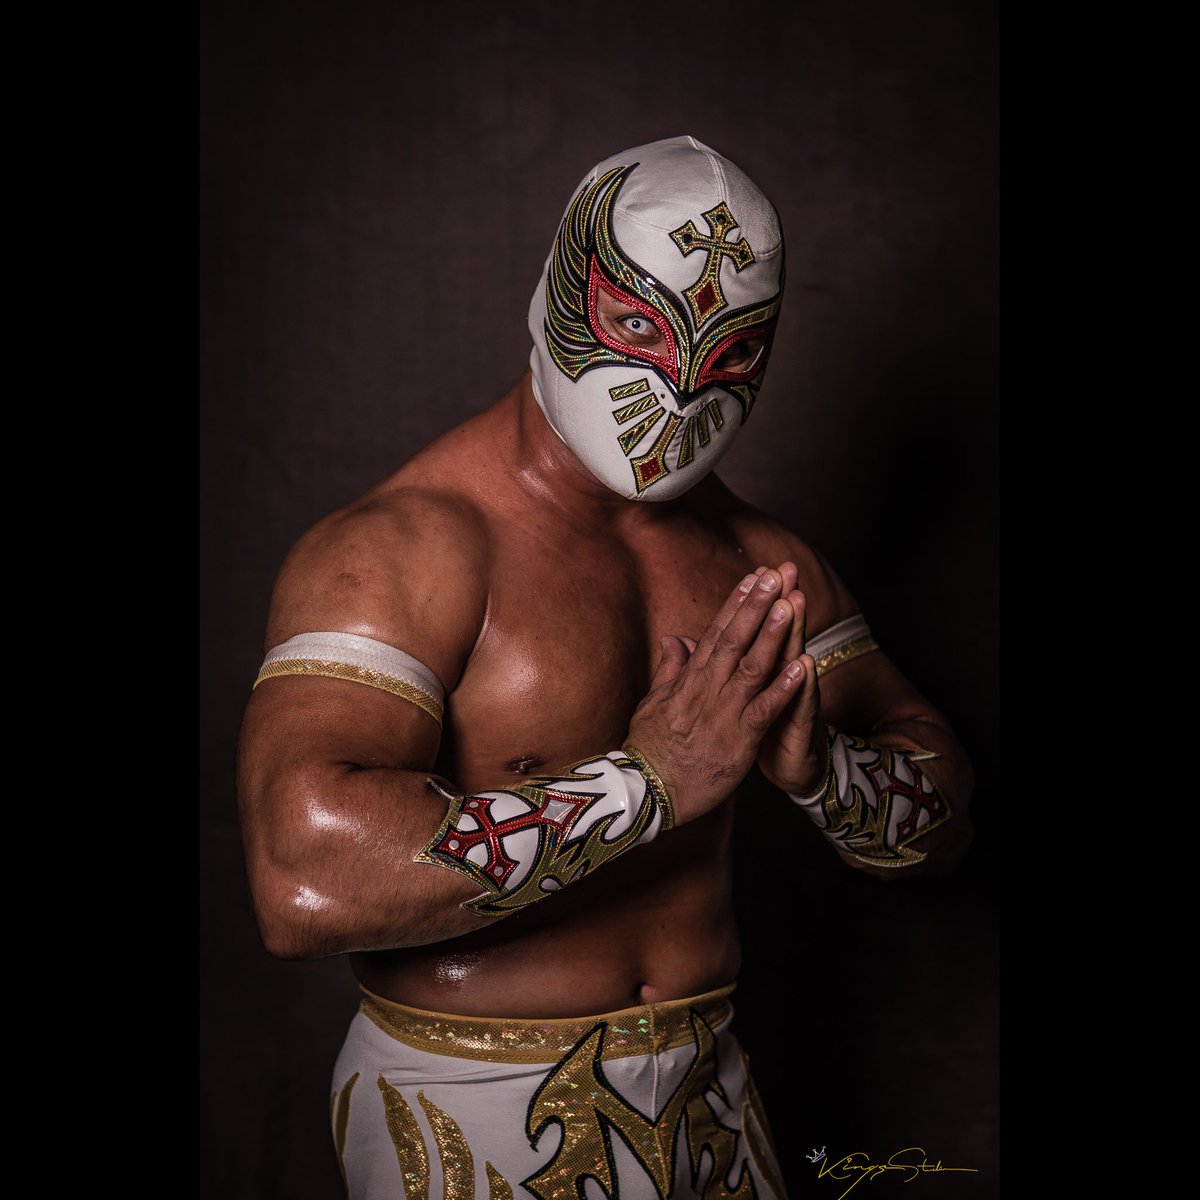 @caristico_official @cmll_mx #cmll #caristico #luchacentral #luchamexicana #luchalibre #lucha #wrestling #photooftheday